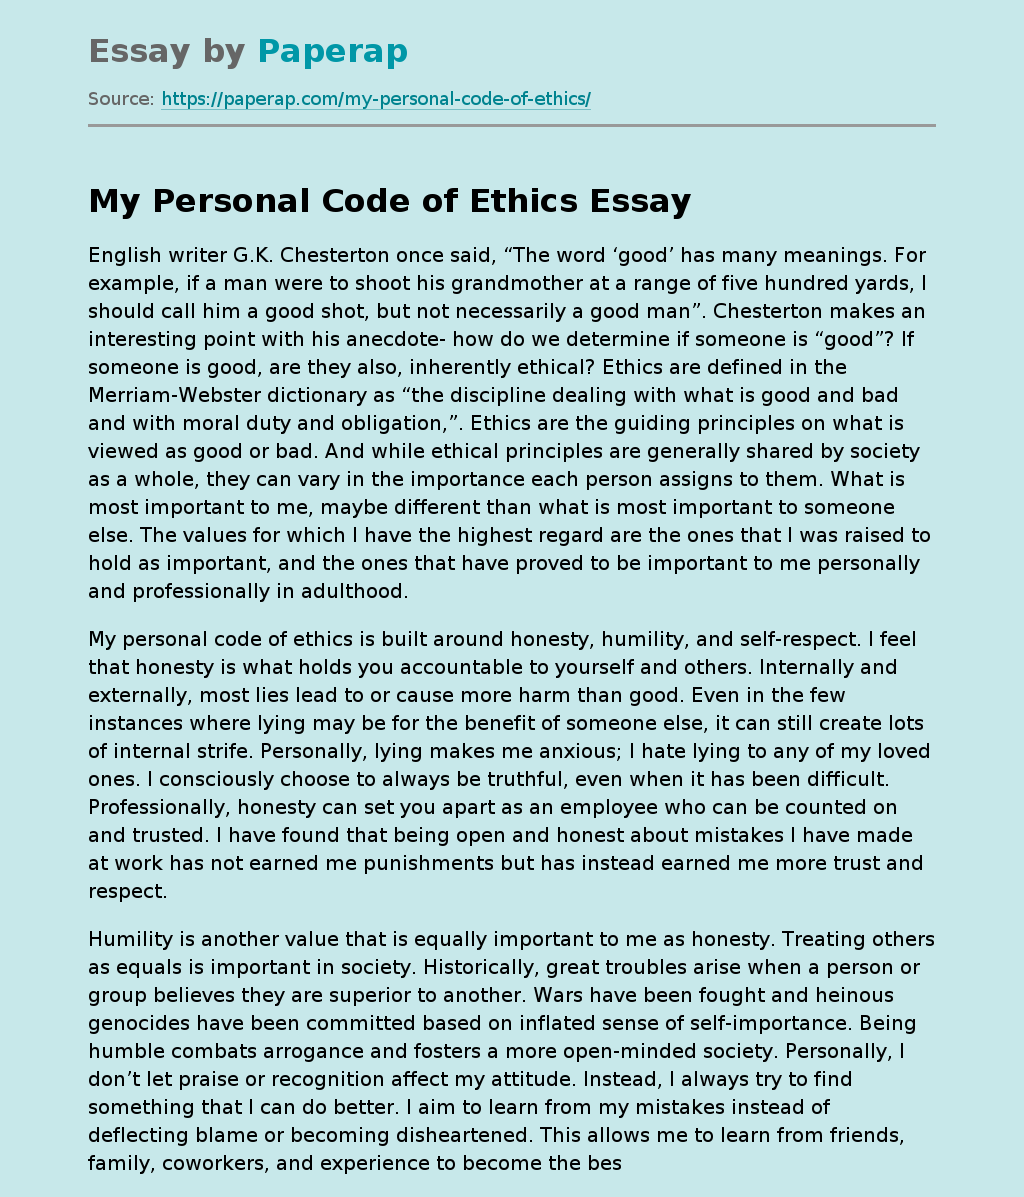 My Personal Code of Ethics